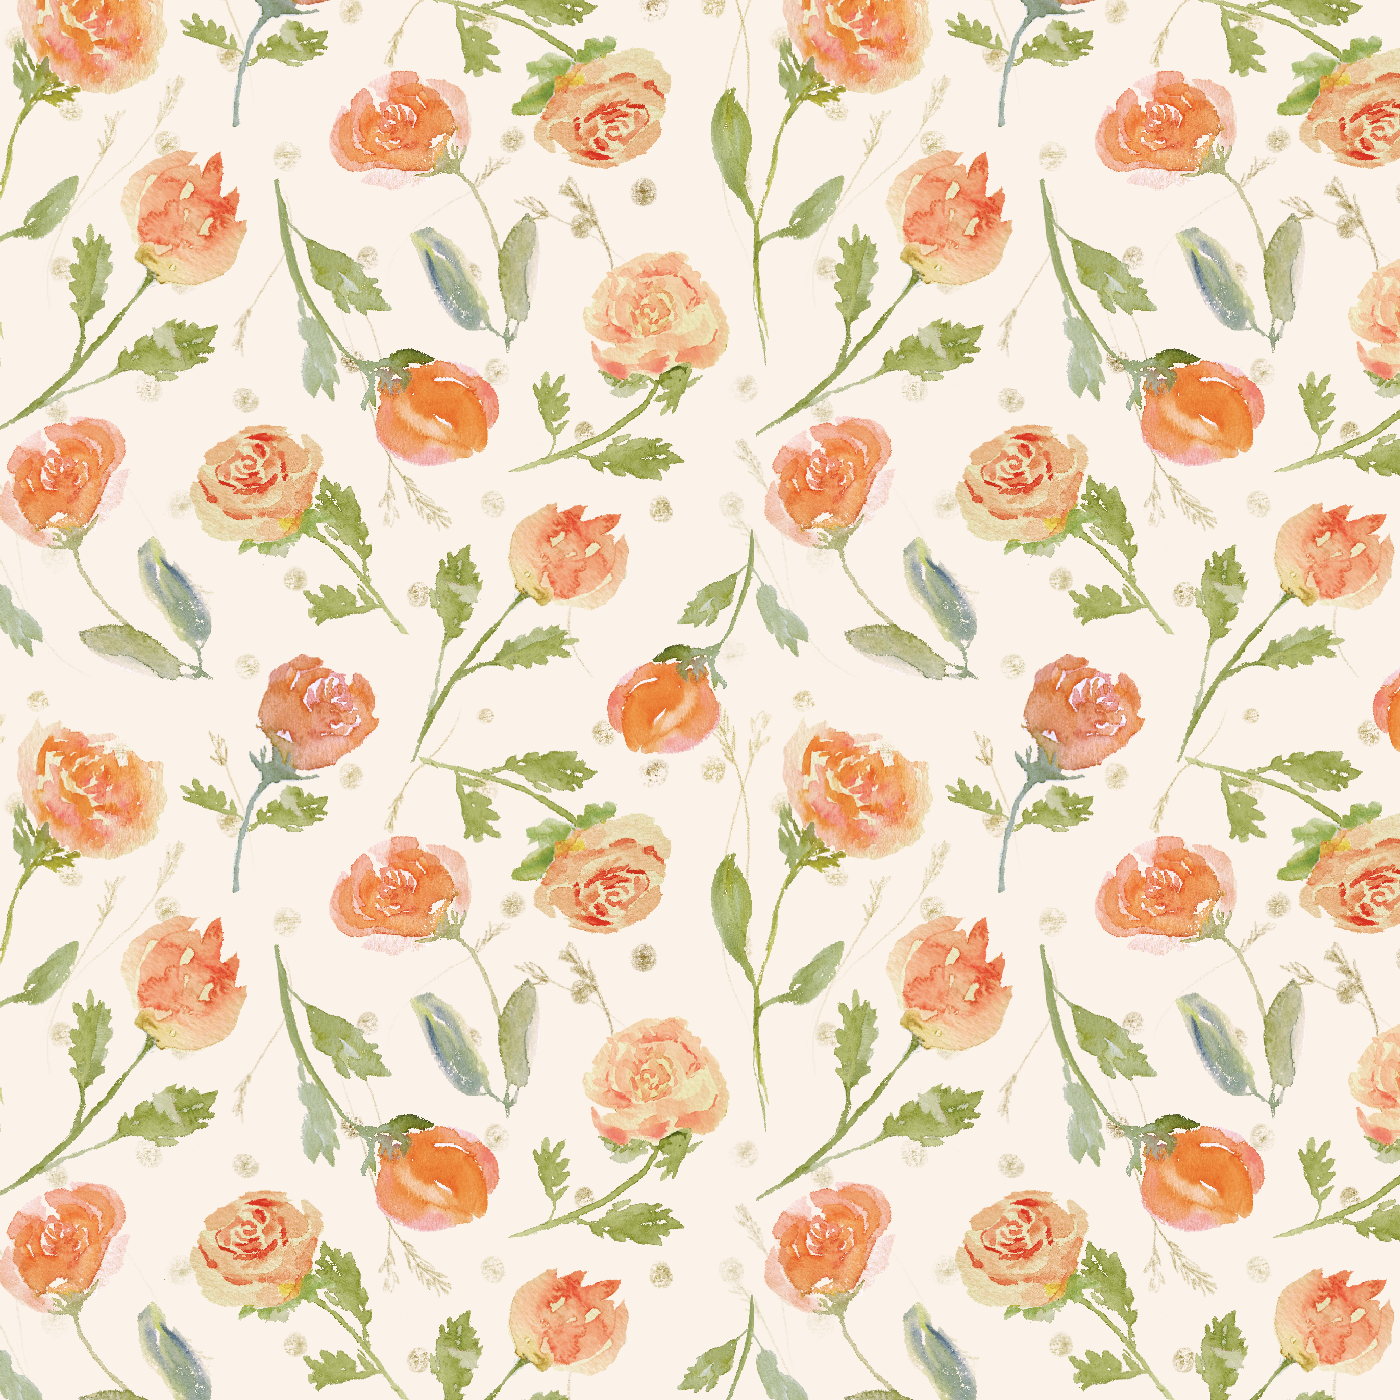 Janet_Hild.watercolor pattern.Little Roses in Apricot